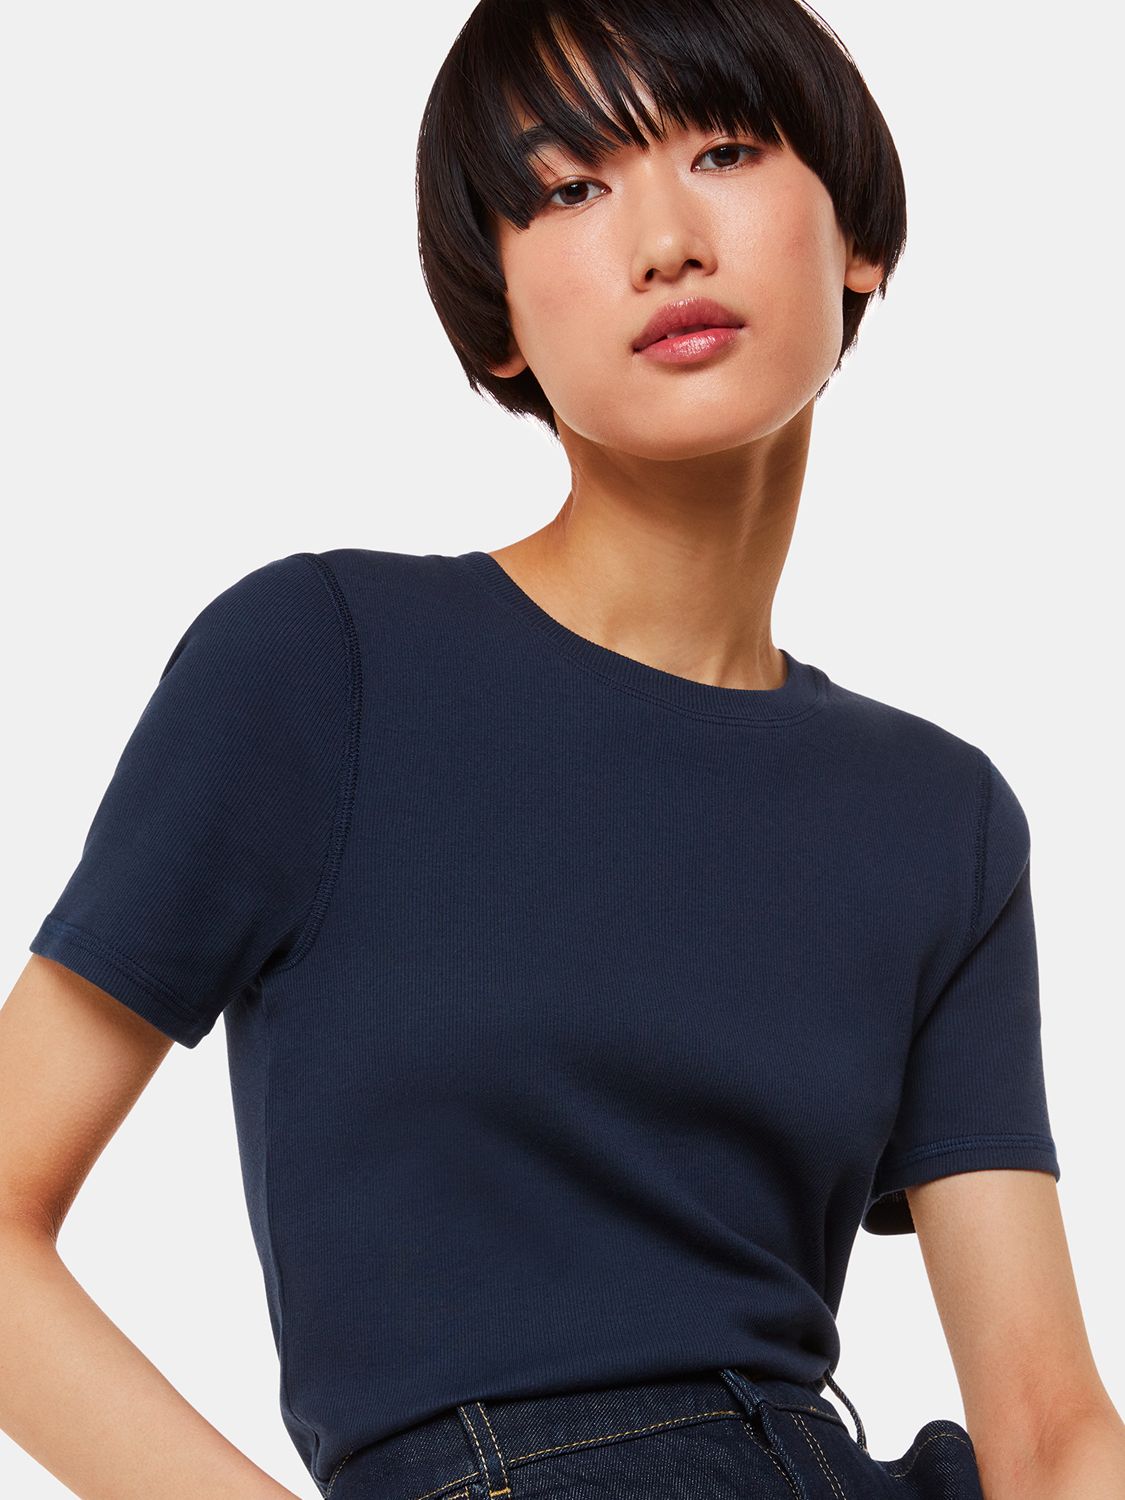 Buy Whistles Ultimate Ribbed Crew Neck T-Shirt, Navy Online at johnlewis.com